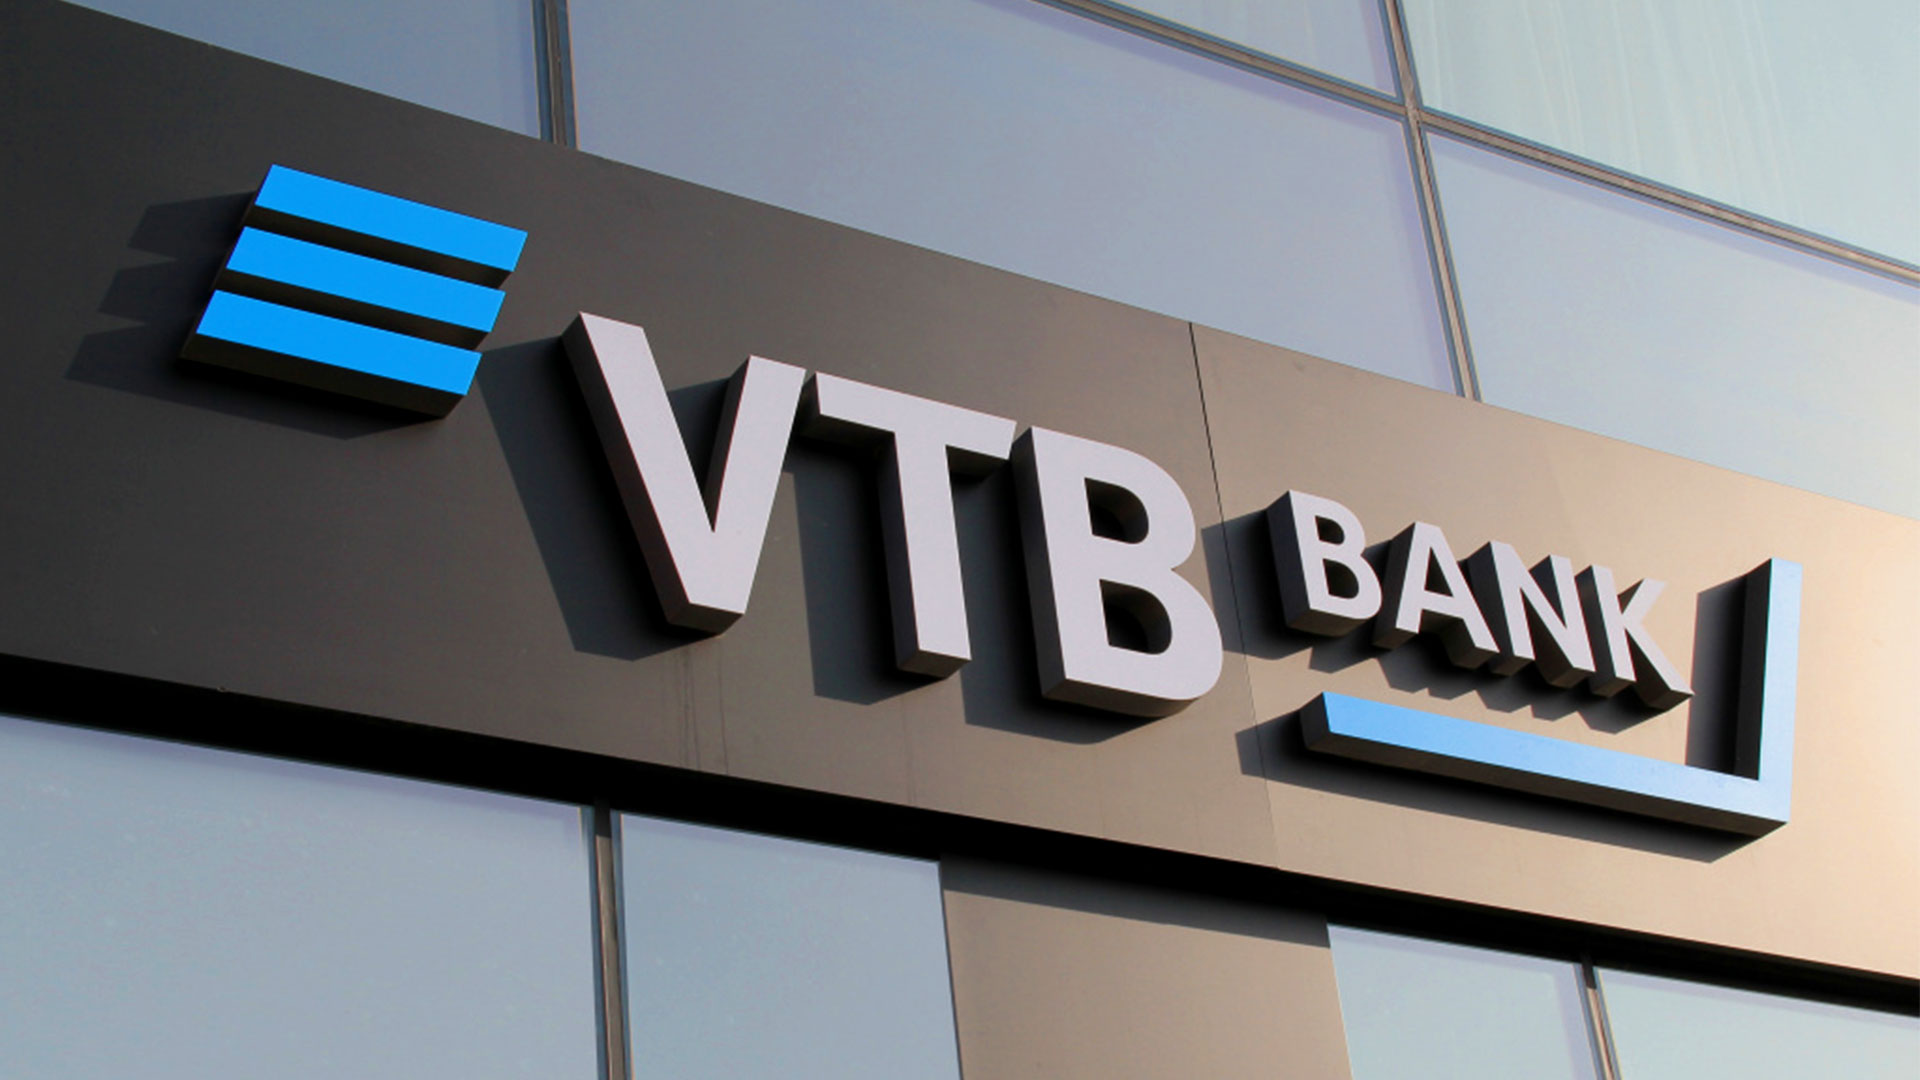 Aim is doubling business, but customer convenience is priority: VTB Bank